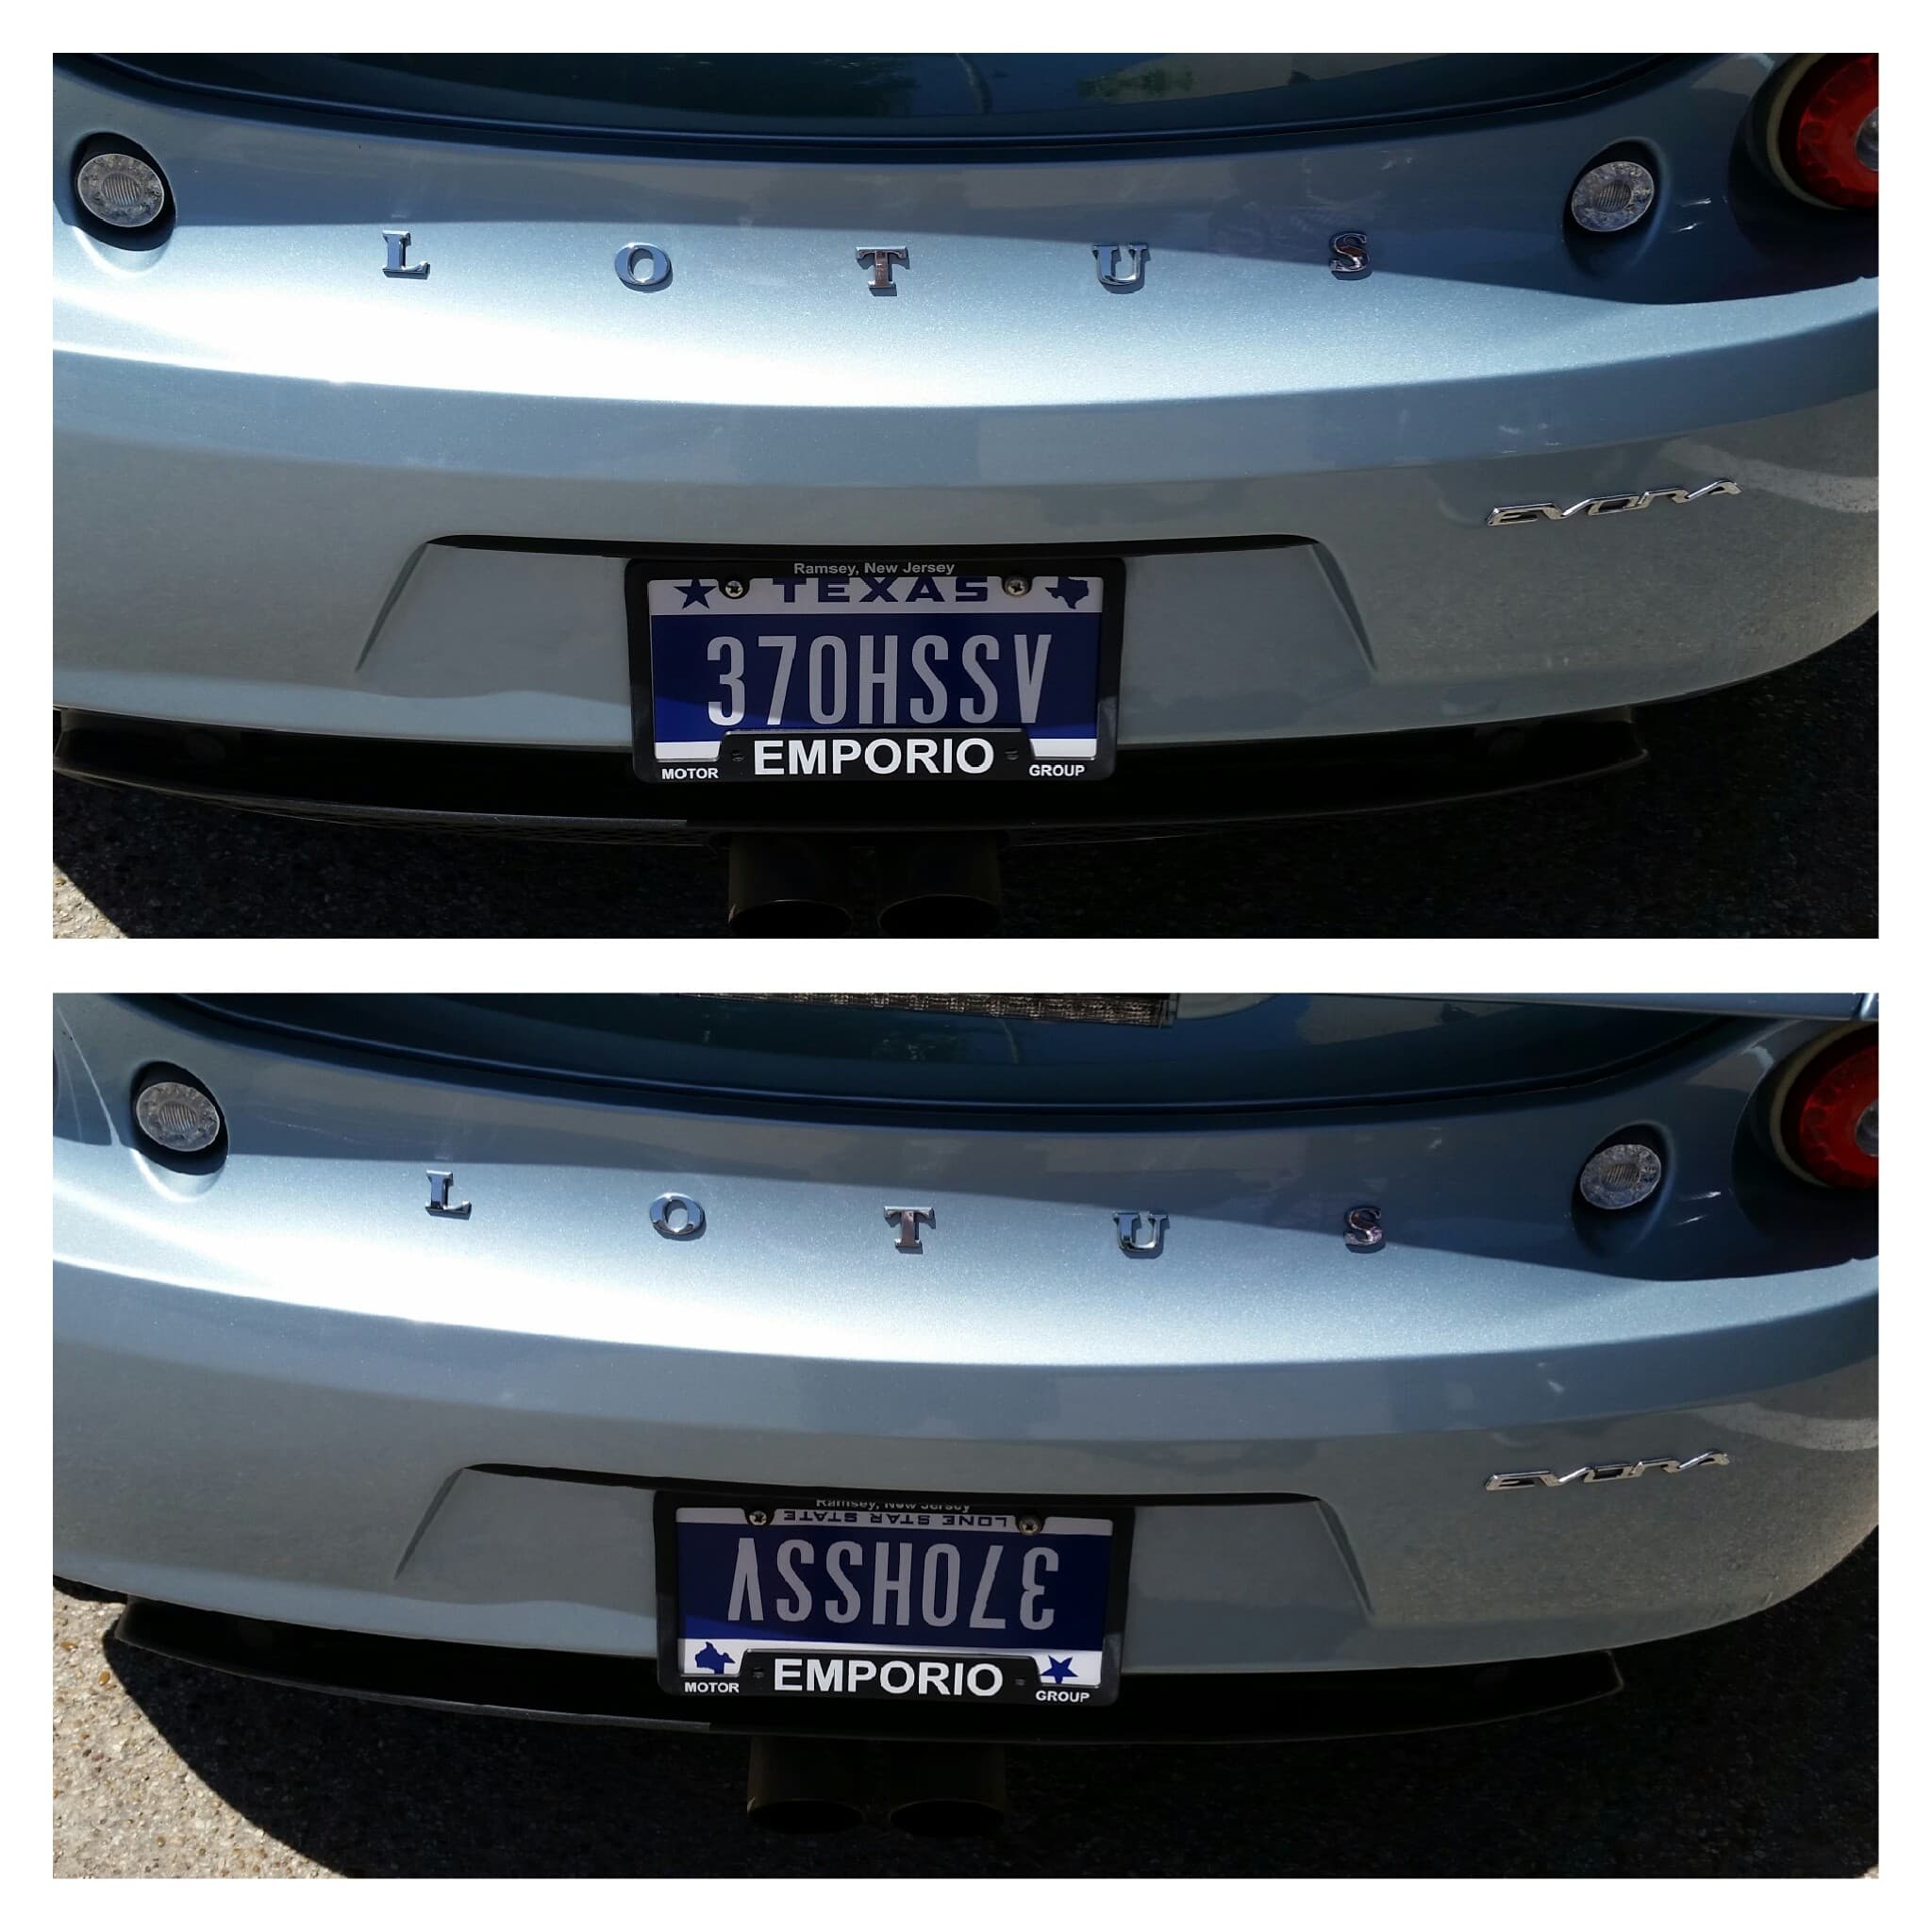 Image of Random License Plates You Can't Believe Got Past the DMV Screeners